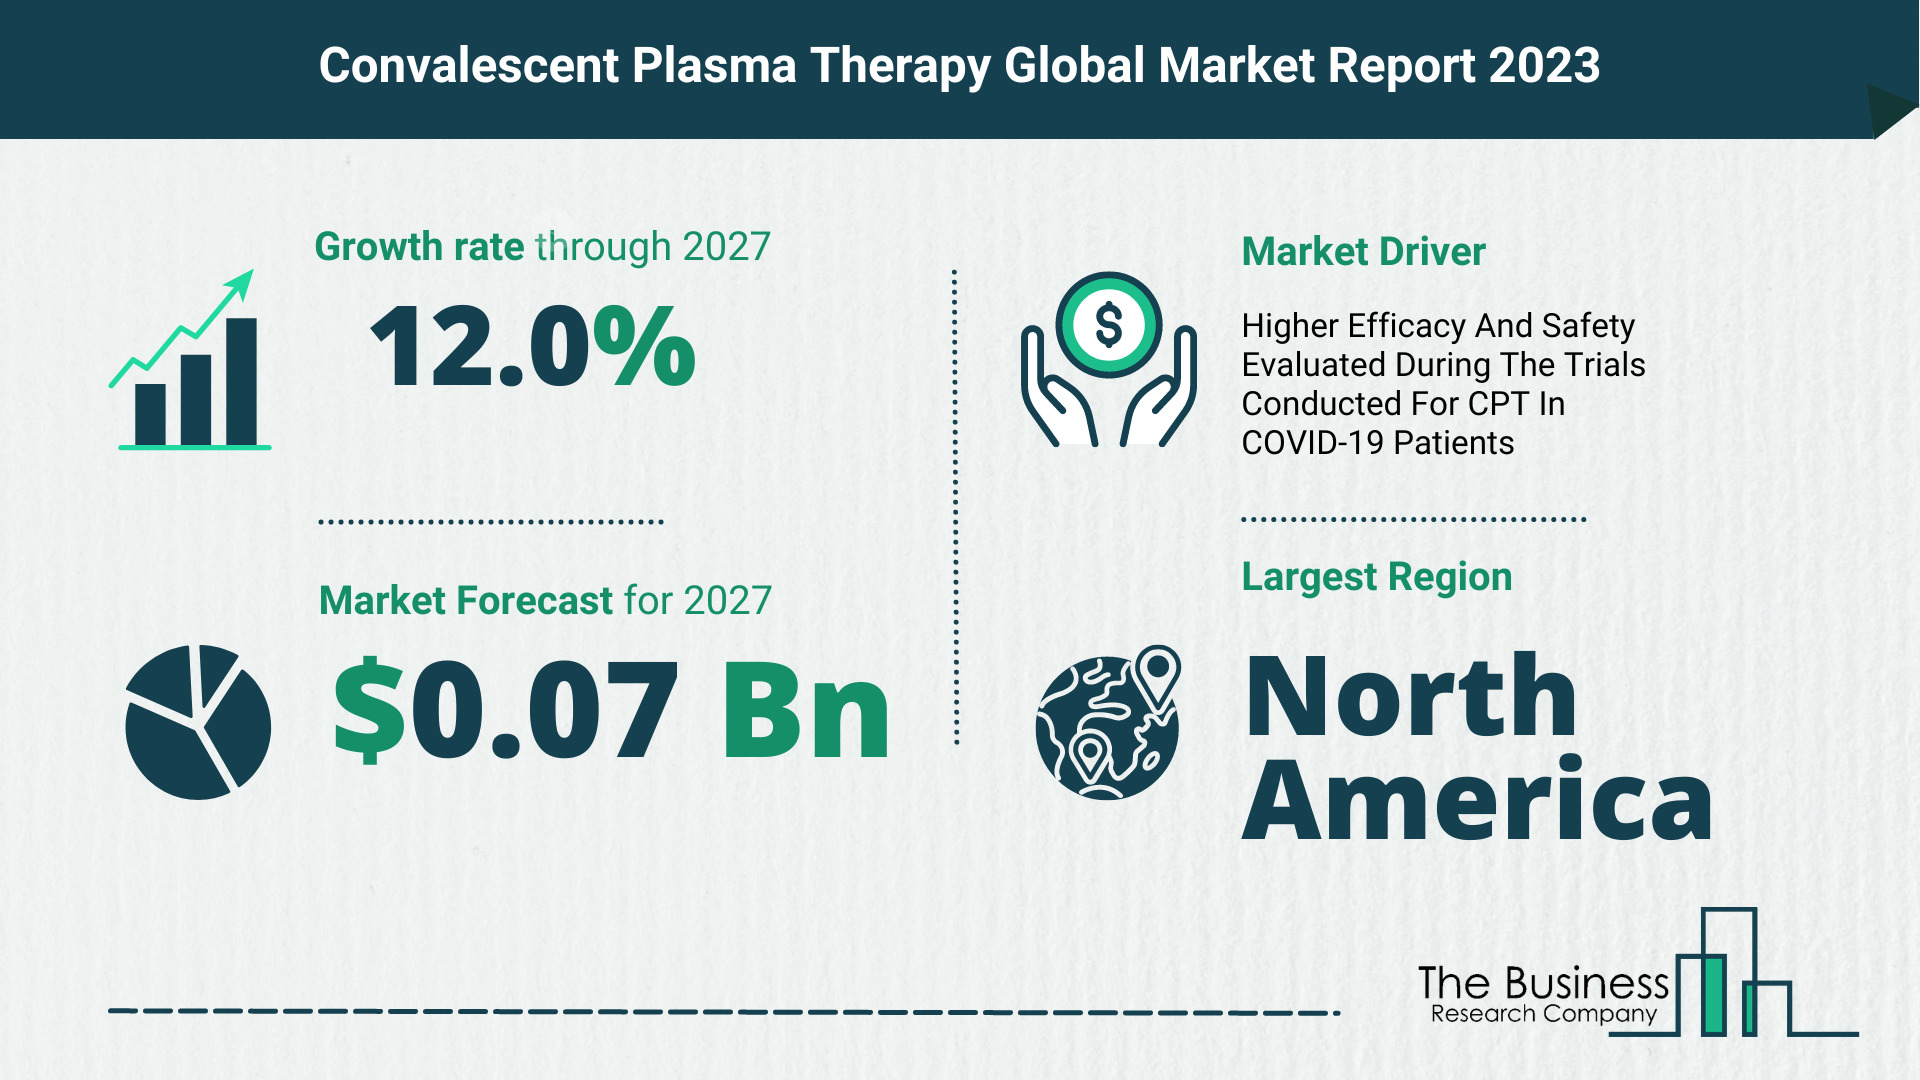 How Will The Convalescent Plasma Therapy Market Globally Expand In 2023?